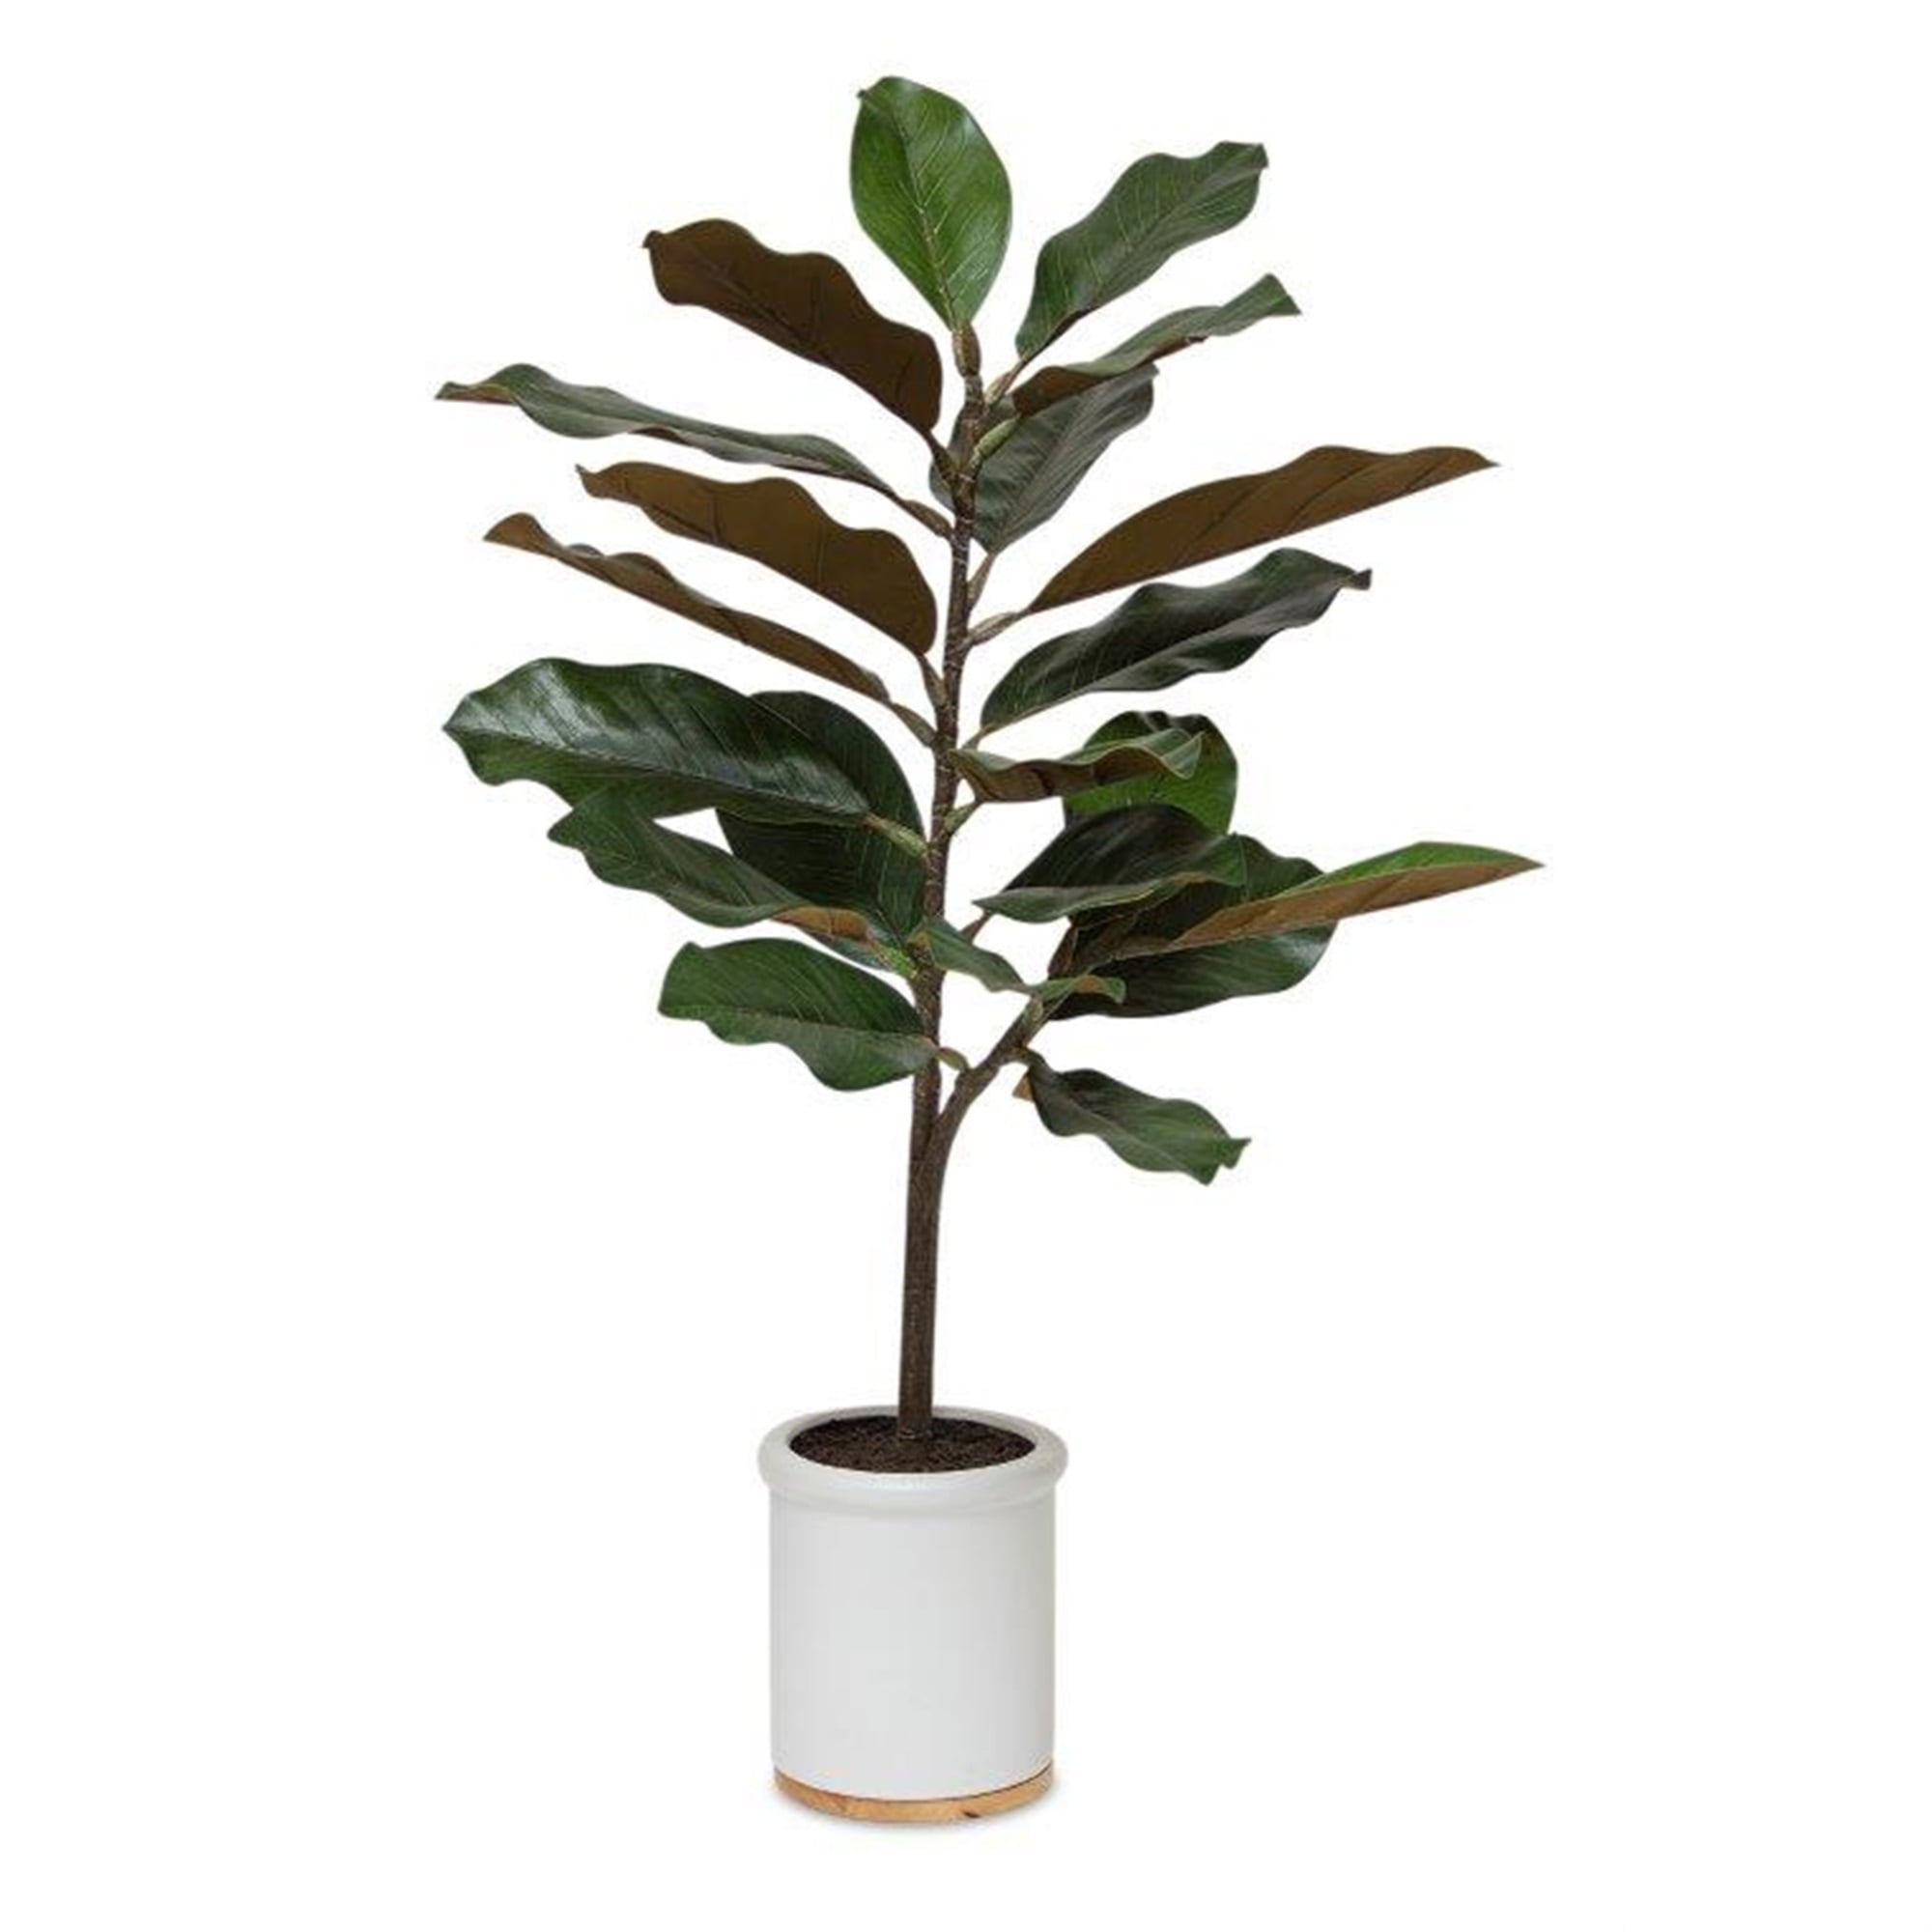 Potted Magnolia Plant 31"H Polyester/Ceramic